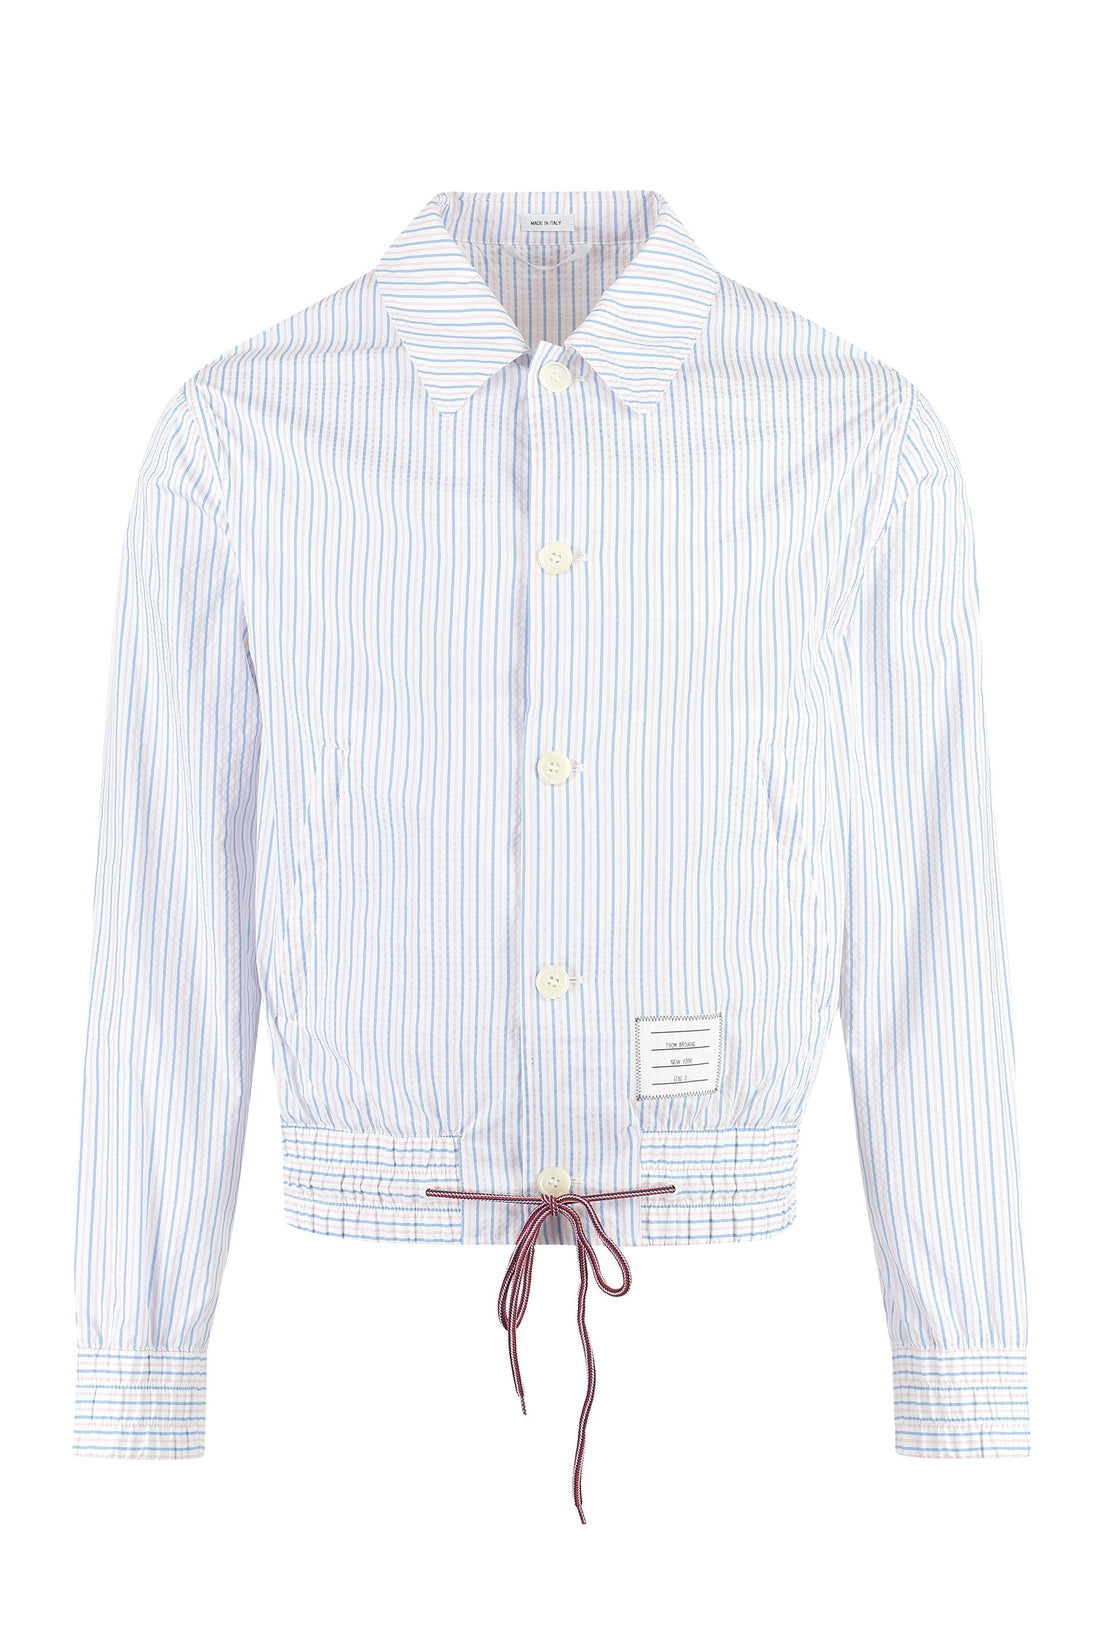 Thom Browne-OUTLET-SALE-Techno fabric jacket-ARCHIVIST